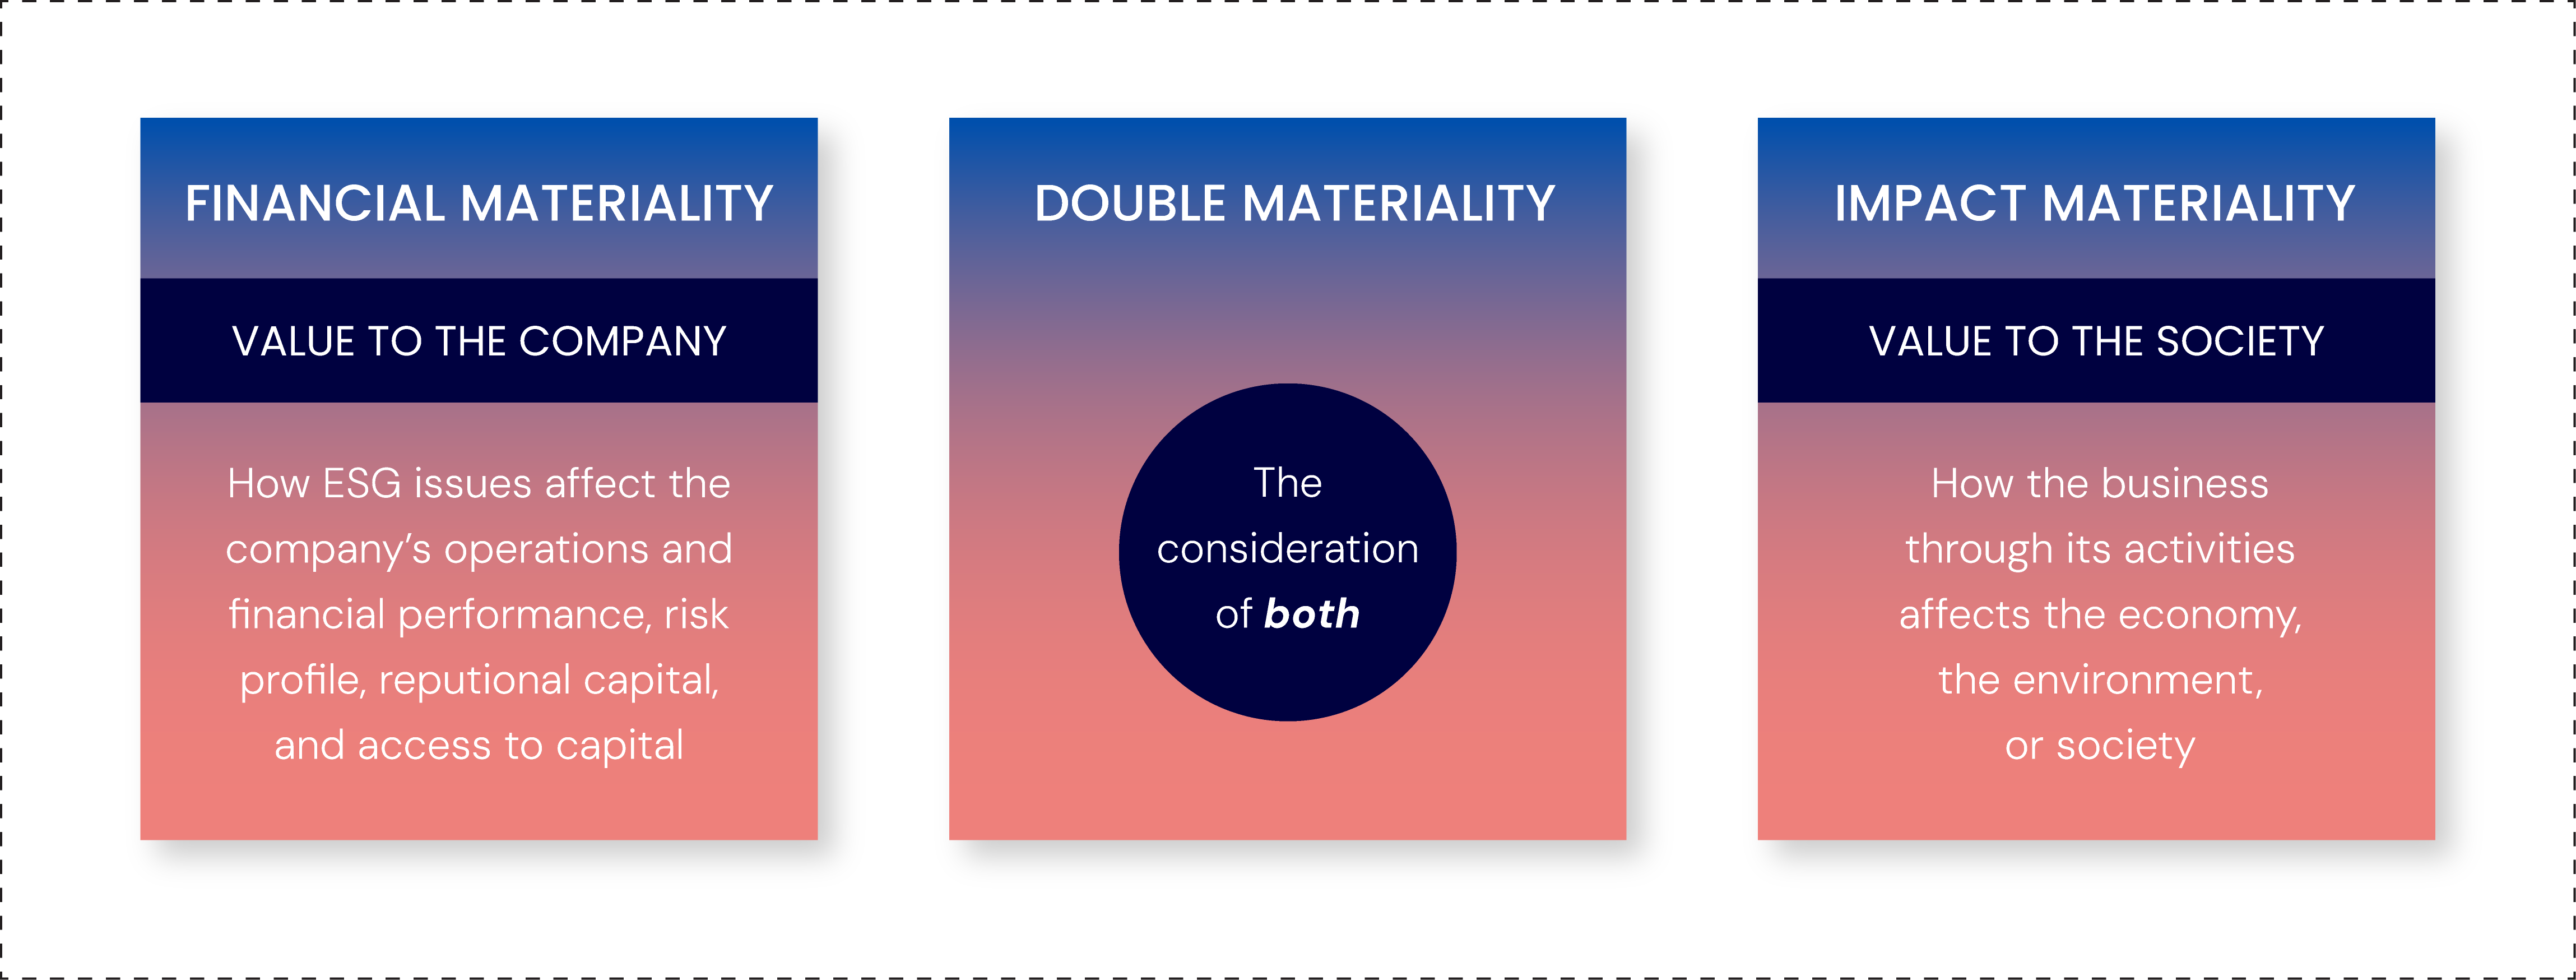 A visual demonstrating the different dimensions of materiality, including both financial materiality and impact materiality. 